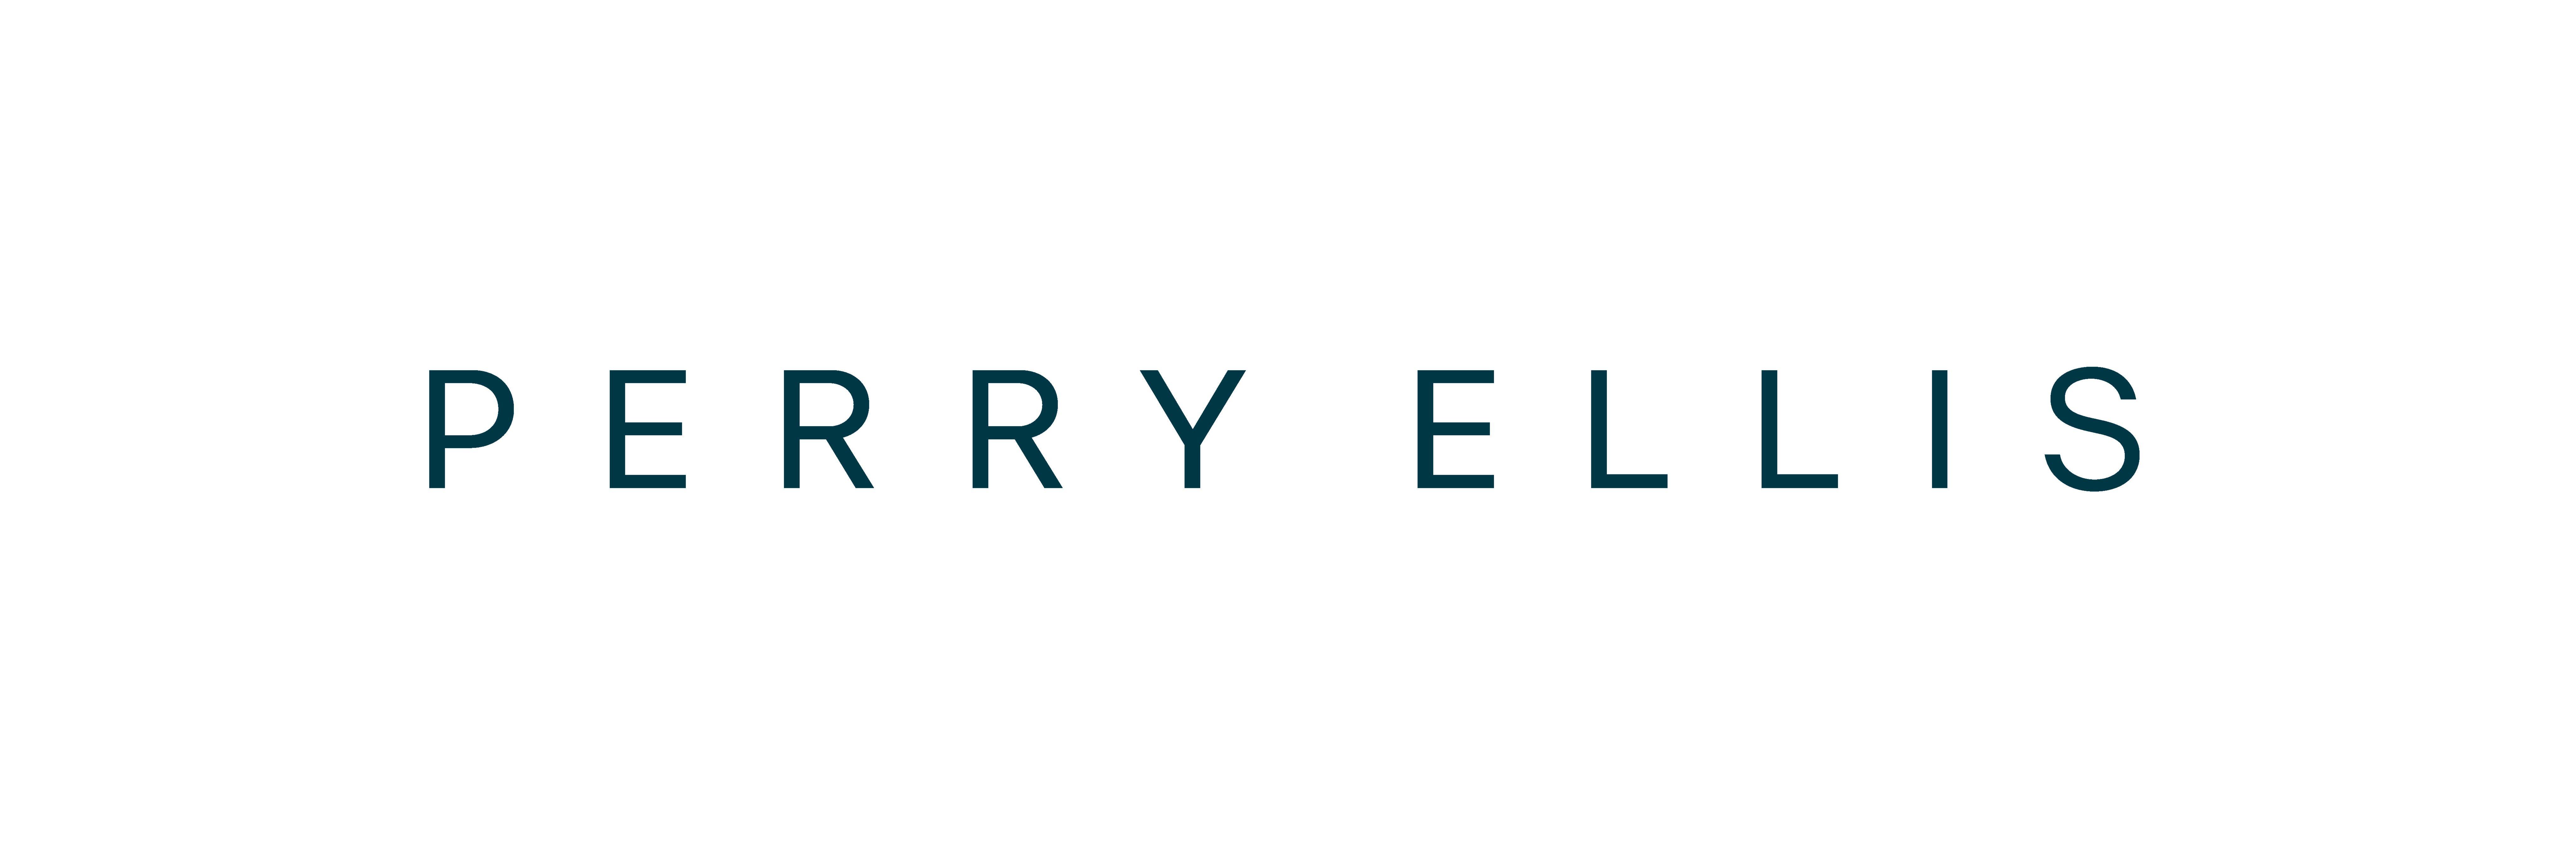 Ellis Logo - What font is used for the Perry Ellis logo?